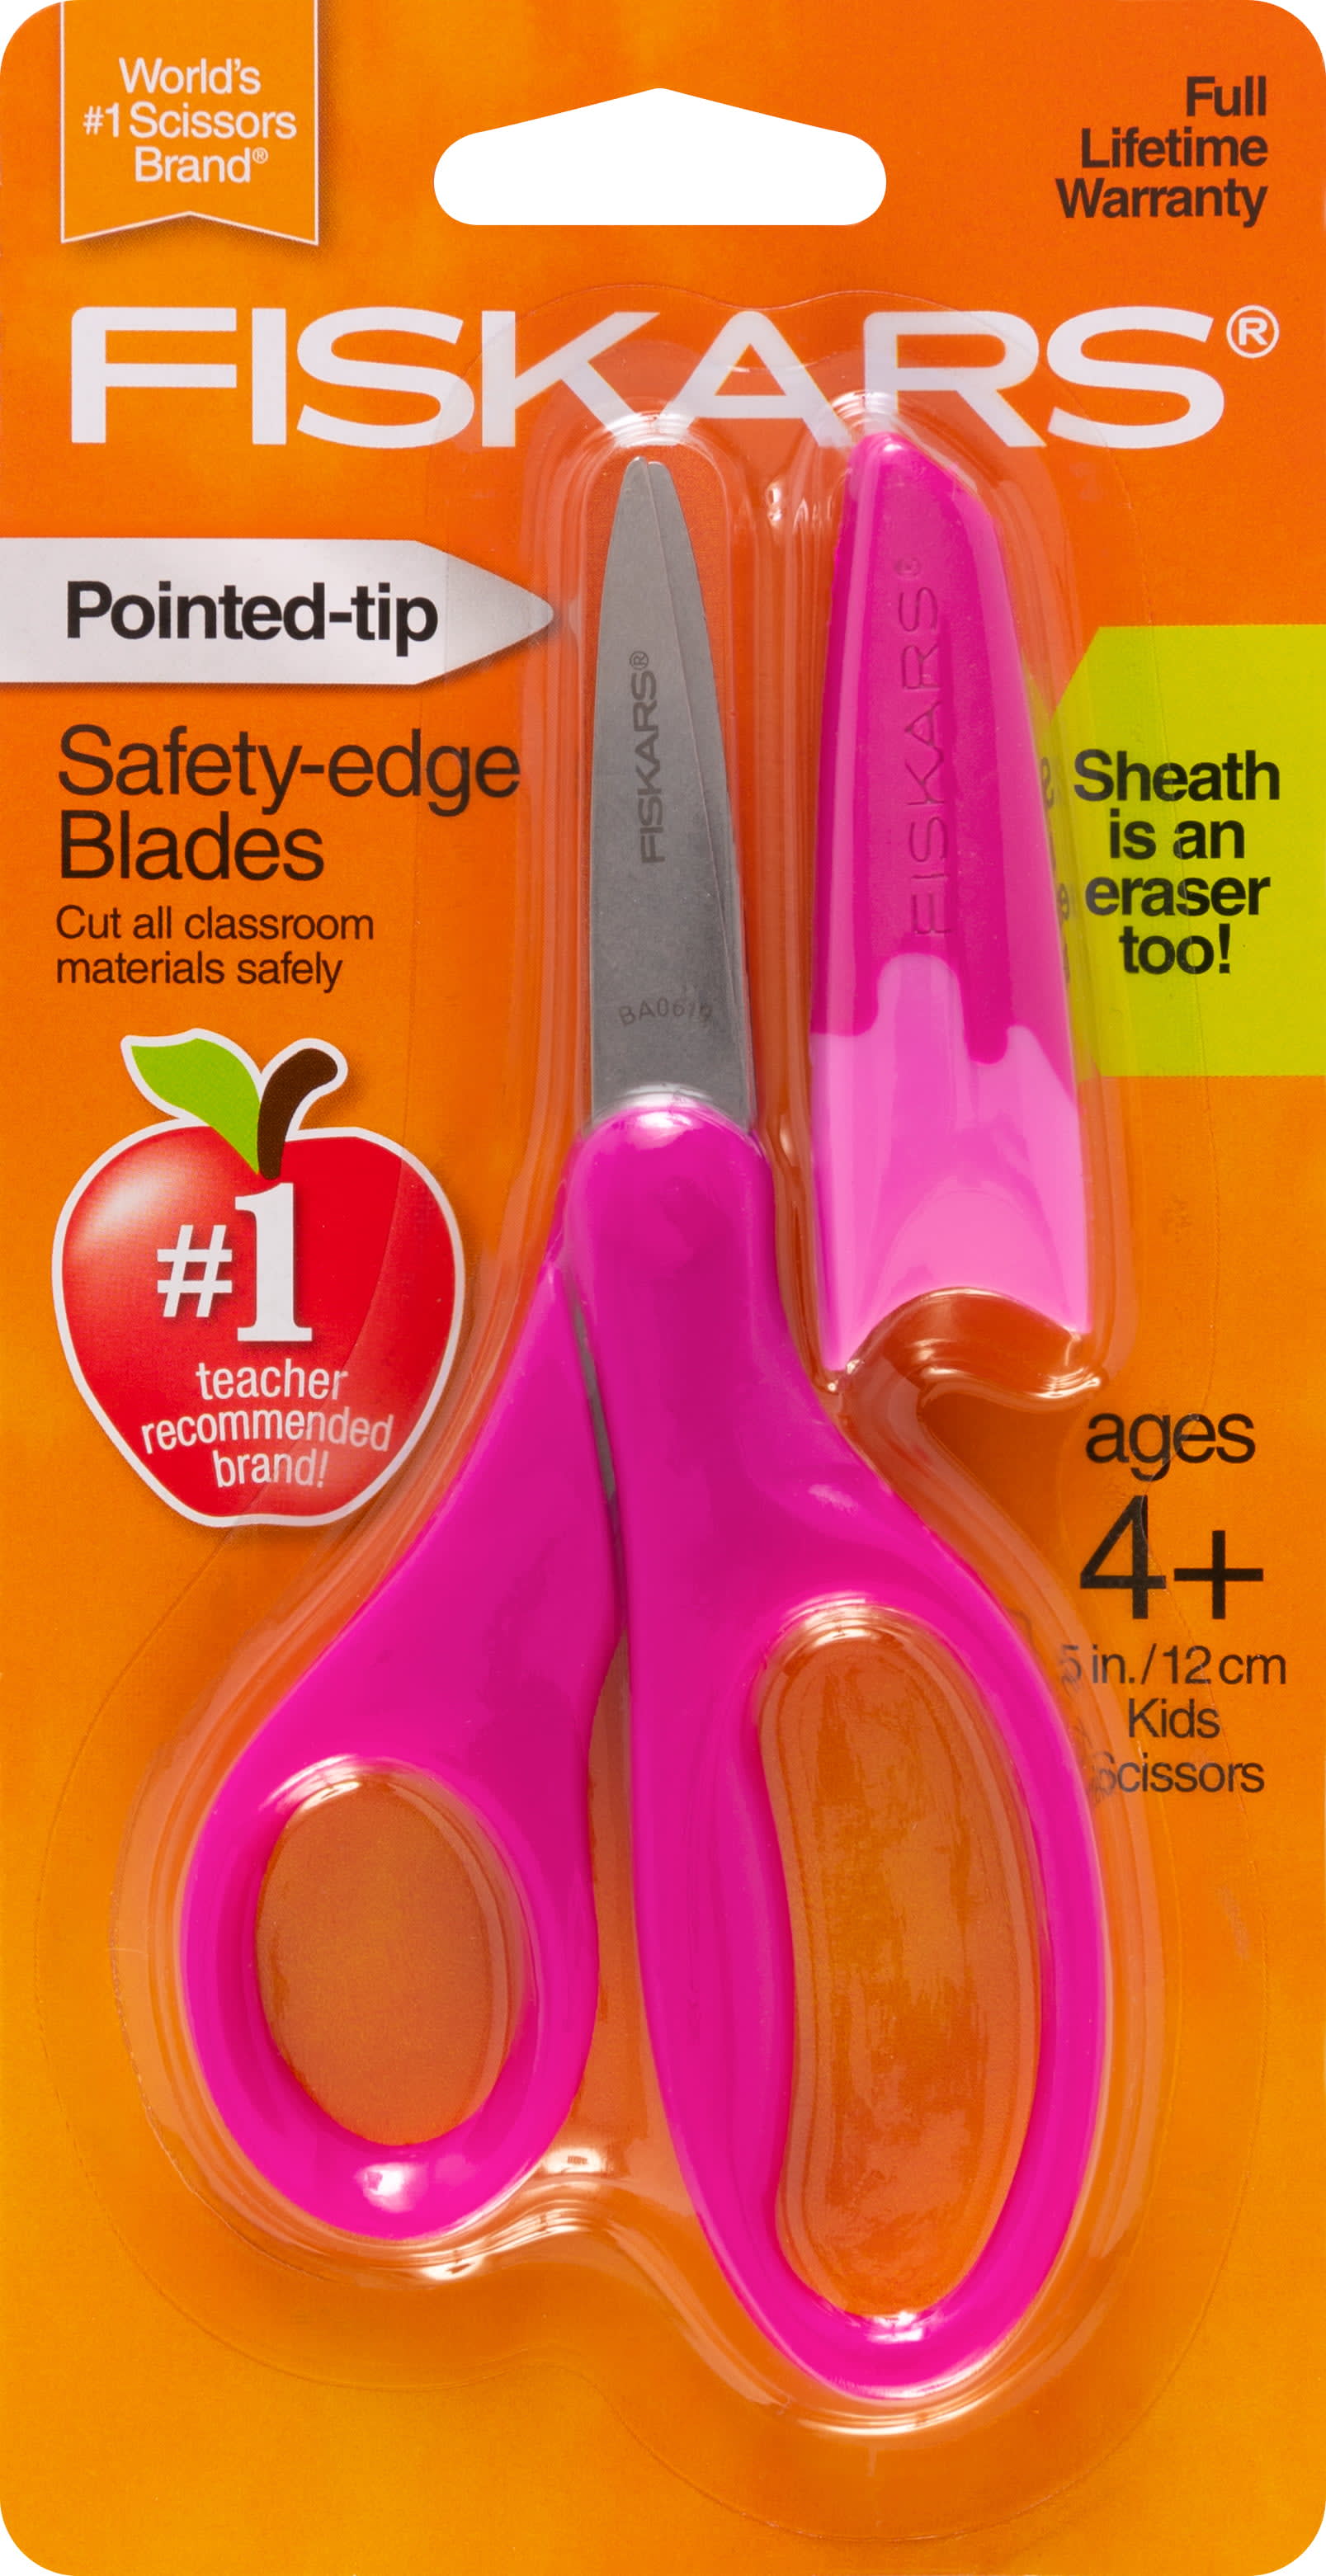 Fiskars Pointed-tip Kids Scissors (5 in.) with Sheath – Pink